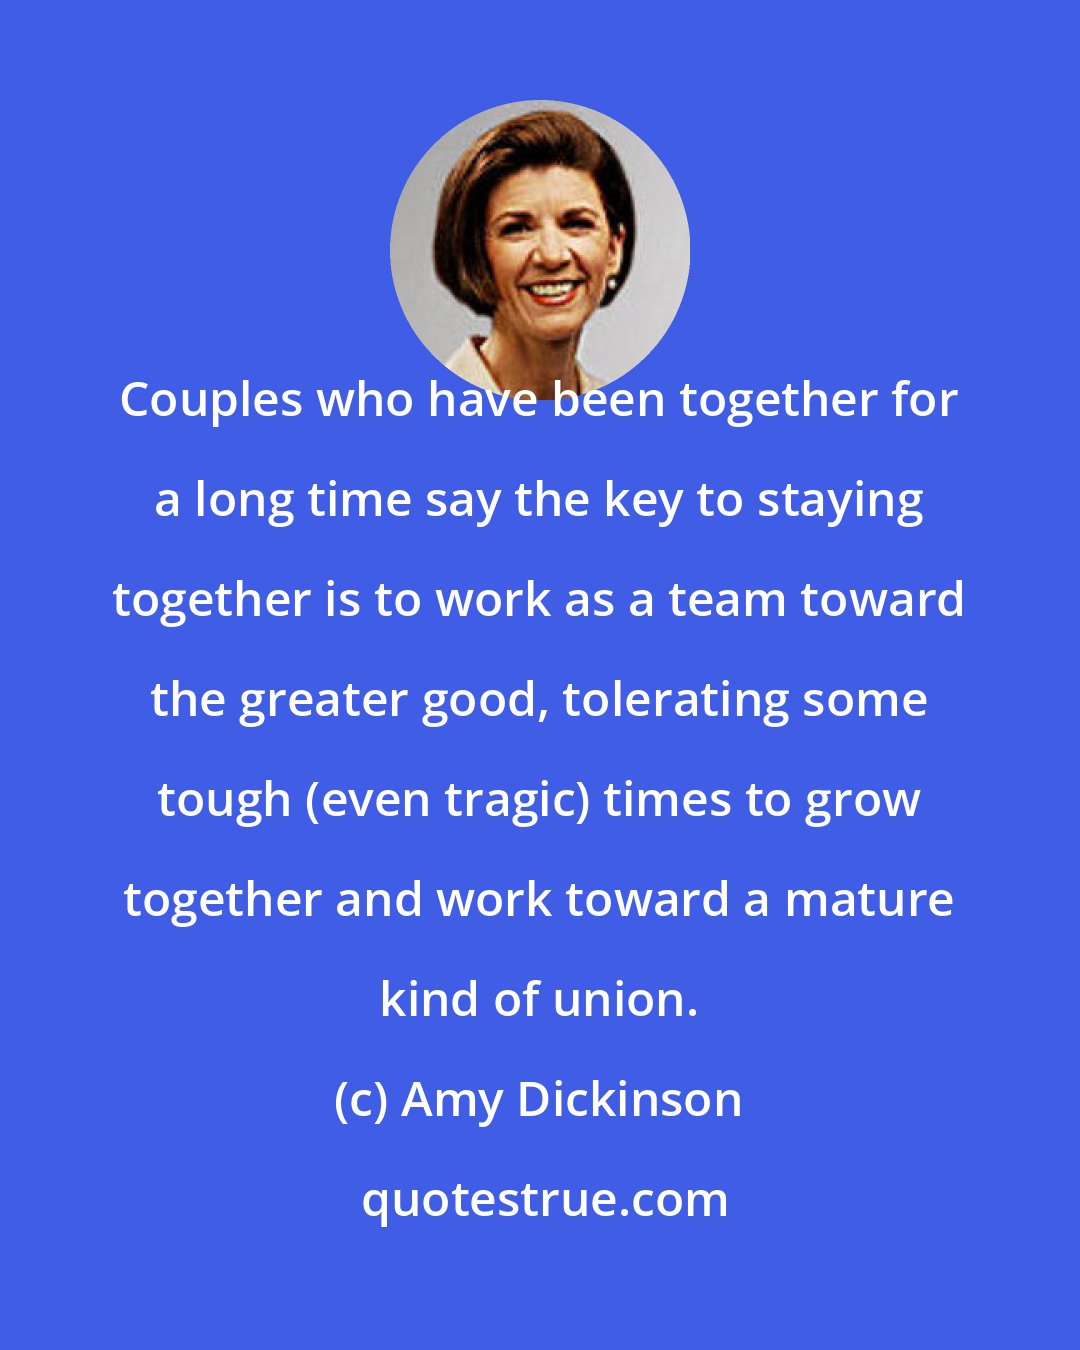 Amy Dickinson: Couples who have been together for a long time say the key to staying together is to work as a team toward the greater good, tolerating some tough (even tragic) times to grow together and work toward a mature kind of union.